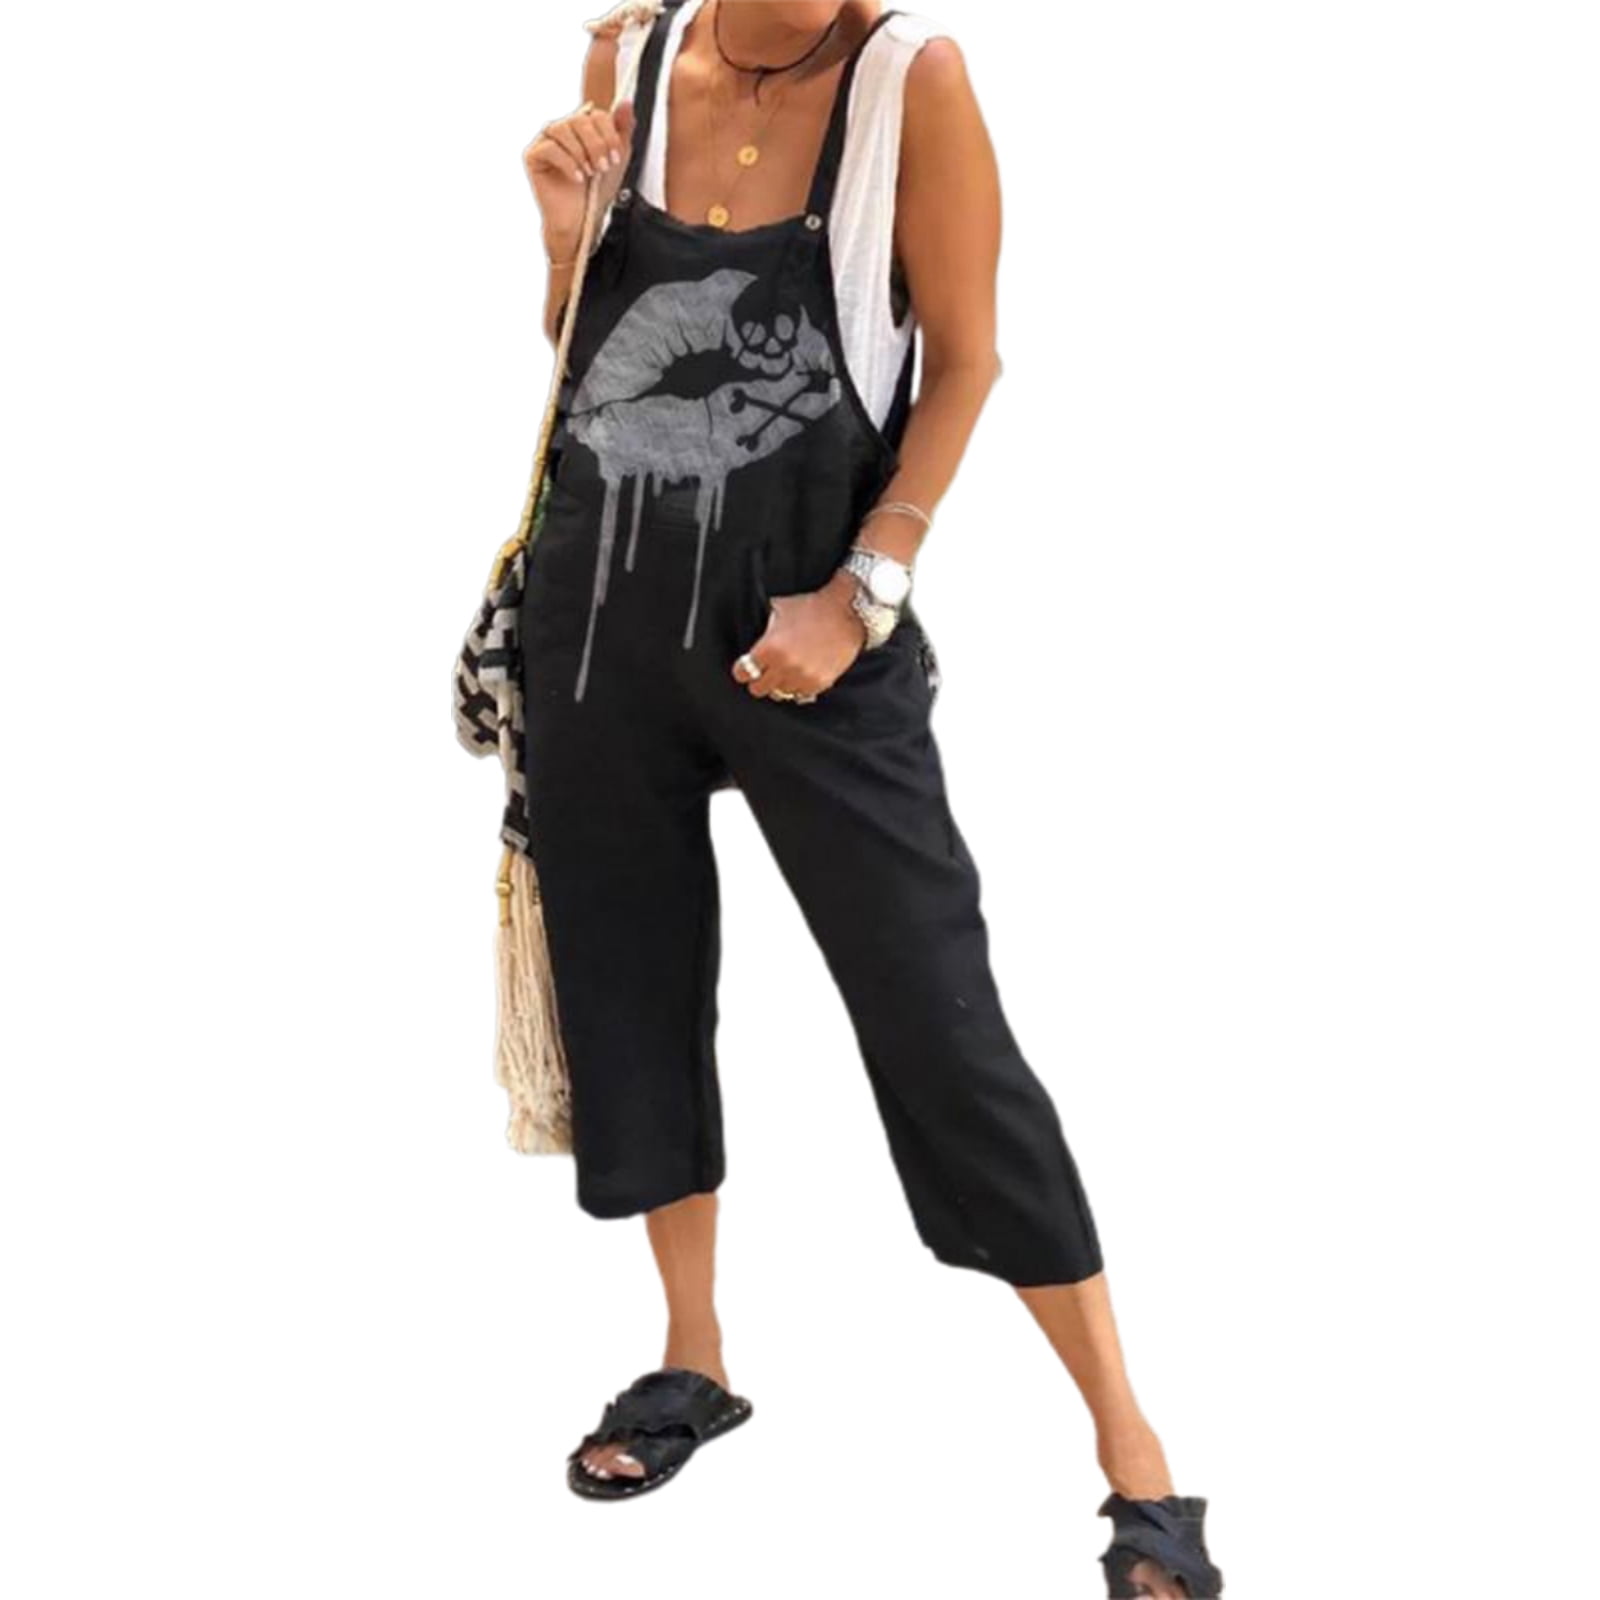 Women's Punk Style Overalls Jumpsuits Casual Baggy Dungarees Suspender Pants Skull Print Overalls Long Playsuit Strap Sleeveless Trousers With Pockets